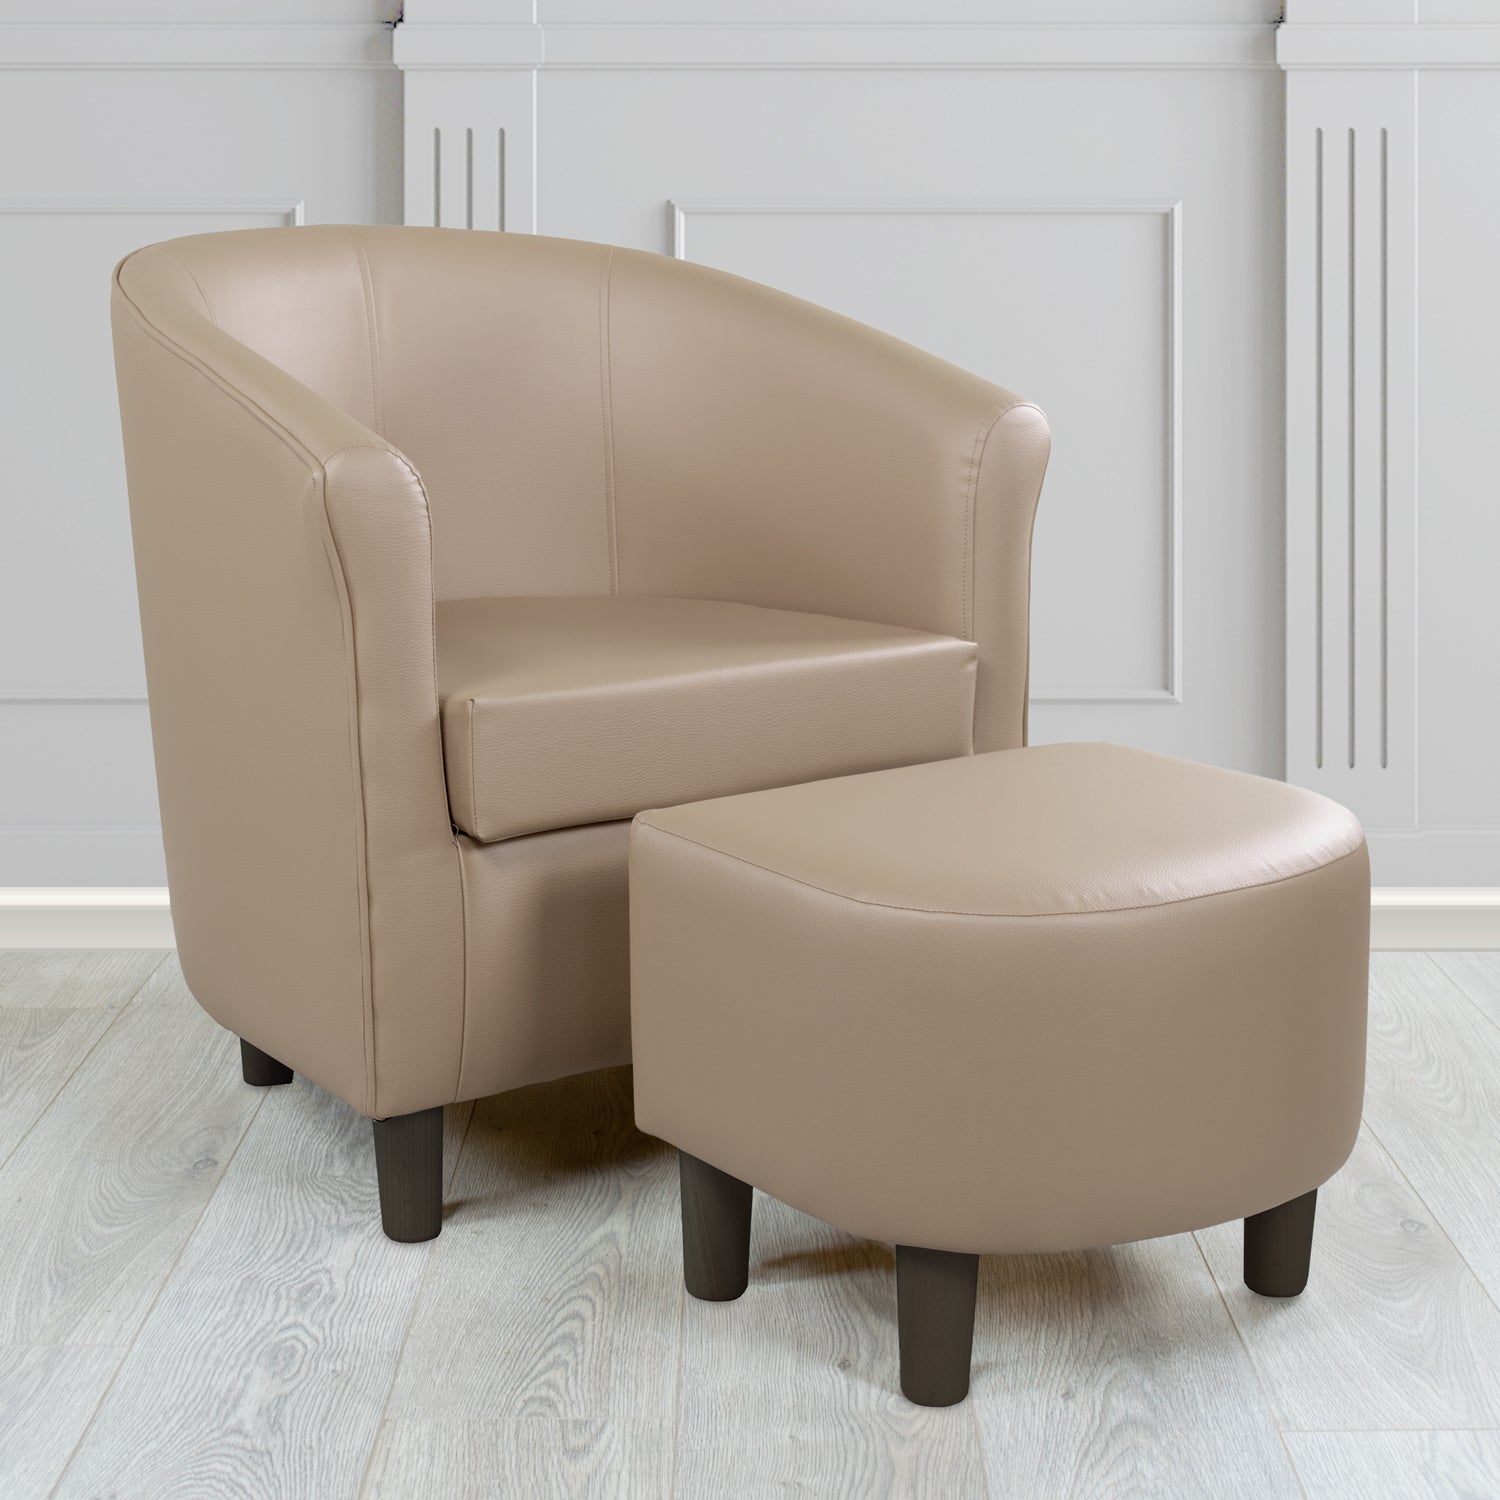 Tuscany Just Colour Magnum Faux Leather Tub Chair with Footstool Set - The Tub Chair Shop